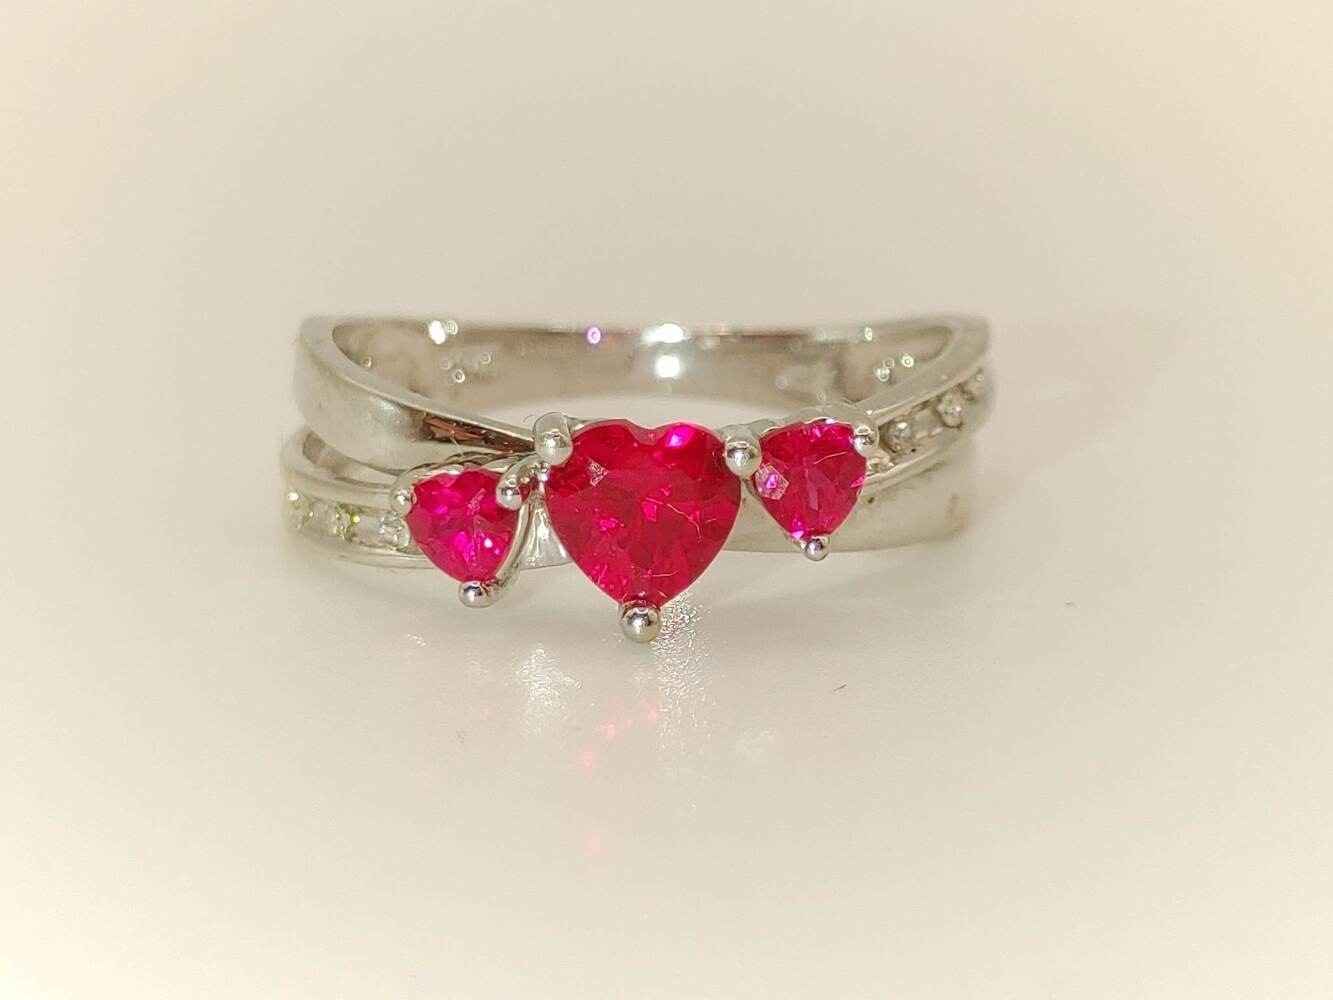 Lady's 10 Karat White Gold Ring with Deep Pink Heart Stones